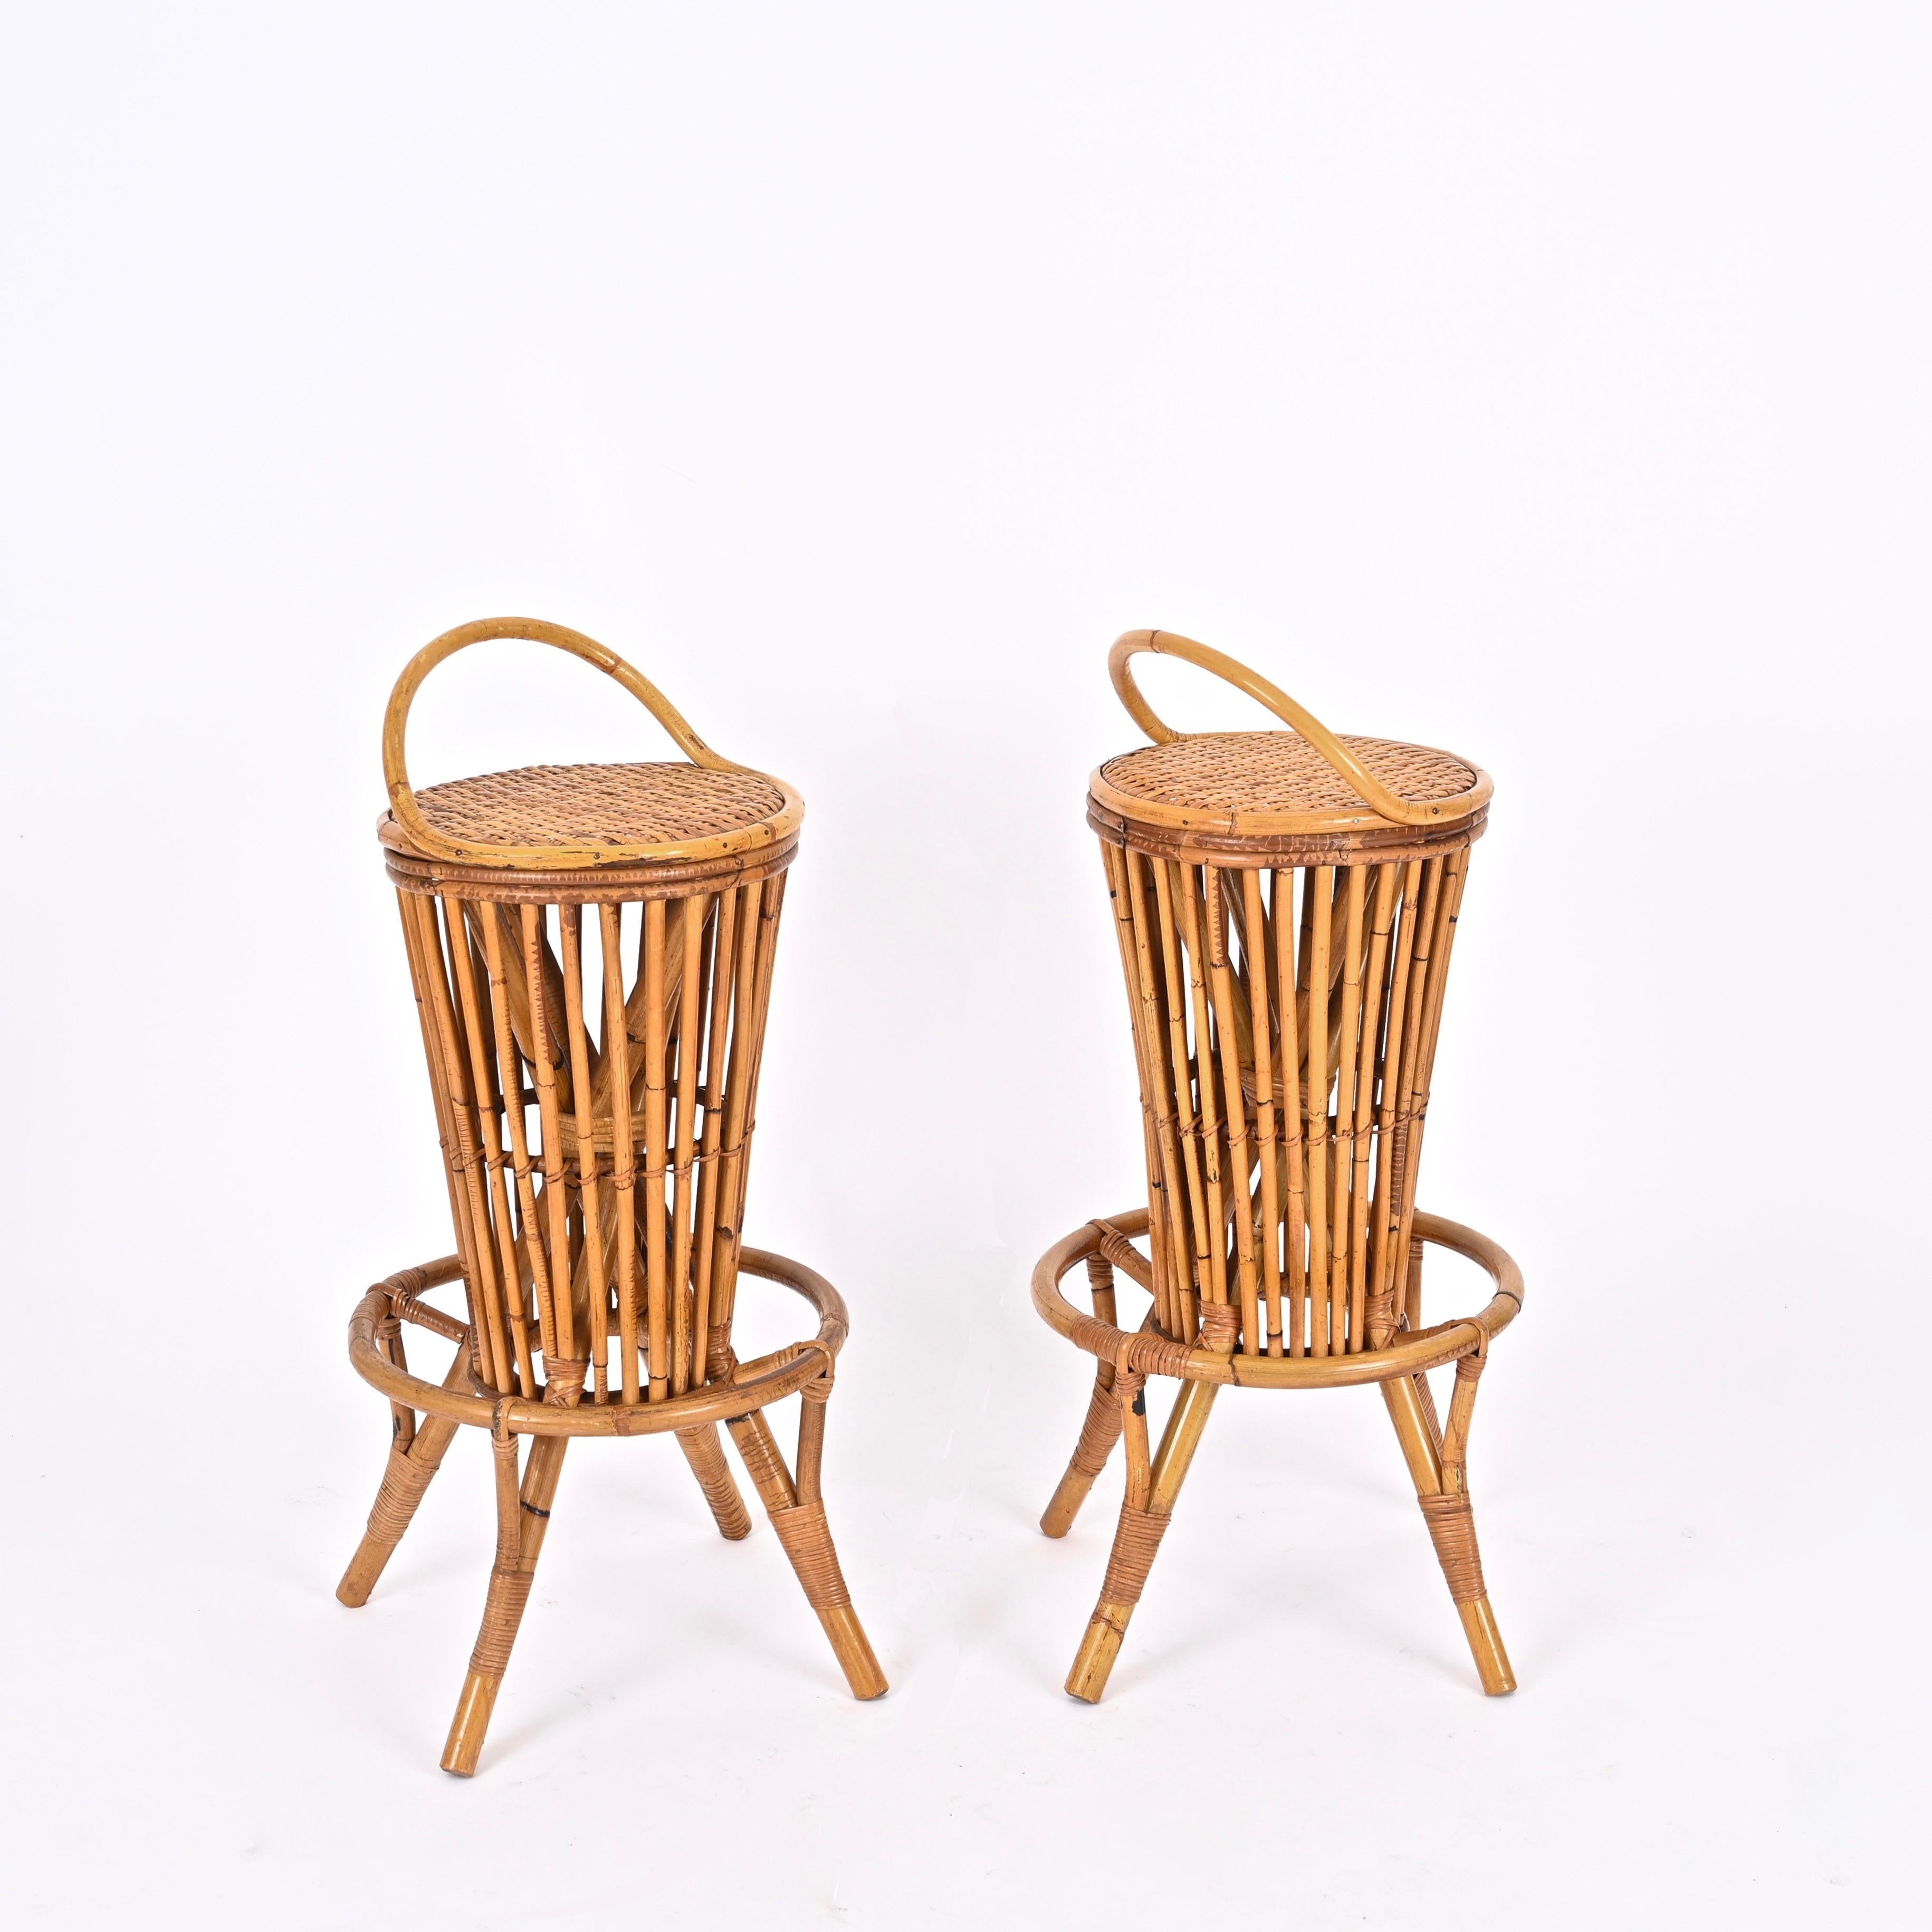 Dry Bar with Two Stools in Rattan, Bamboo and Wicker by Tito Agnoli, Italy 1950s For Sale 9